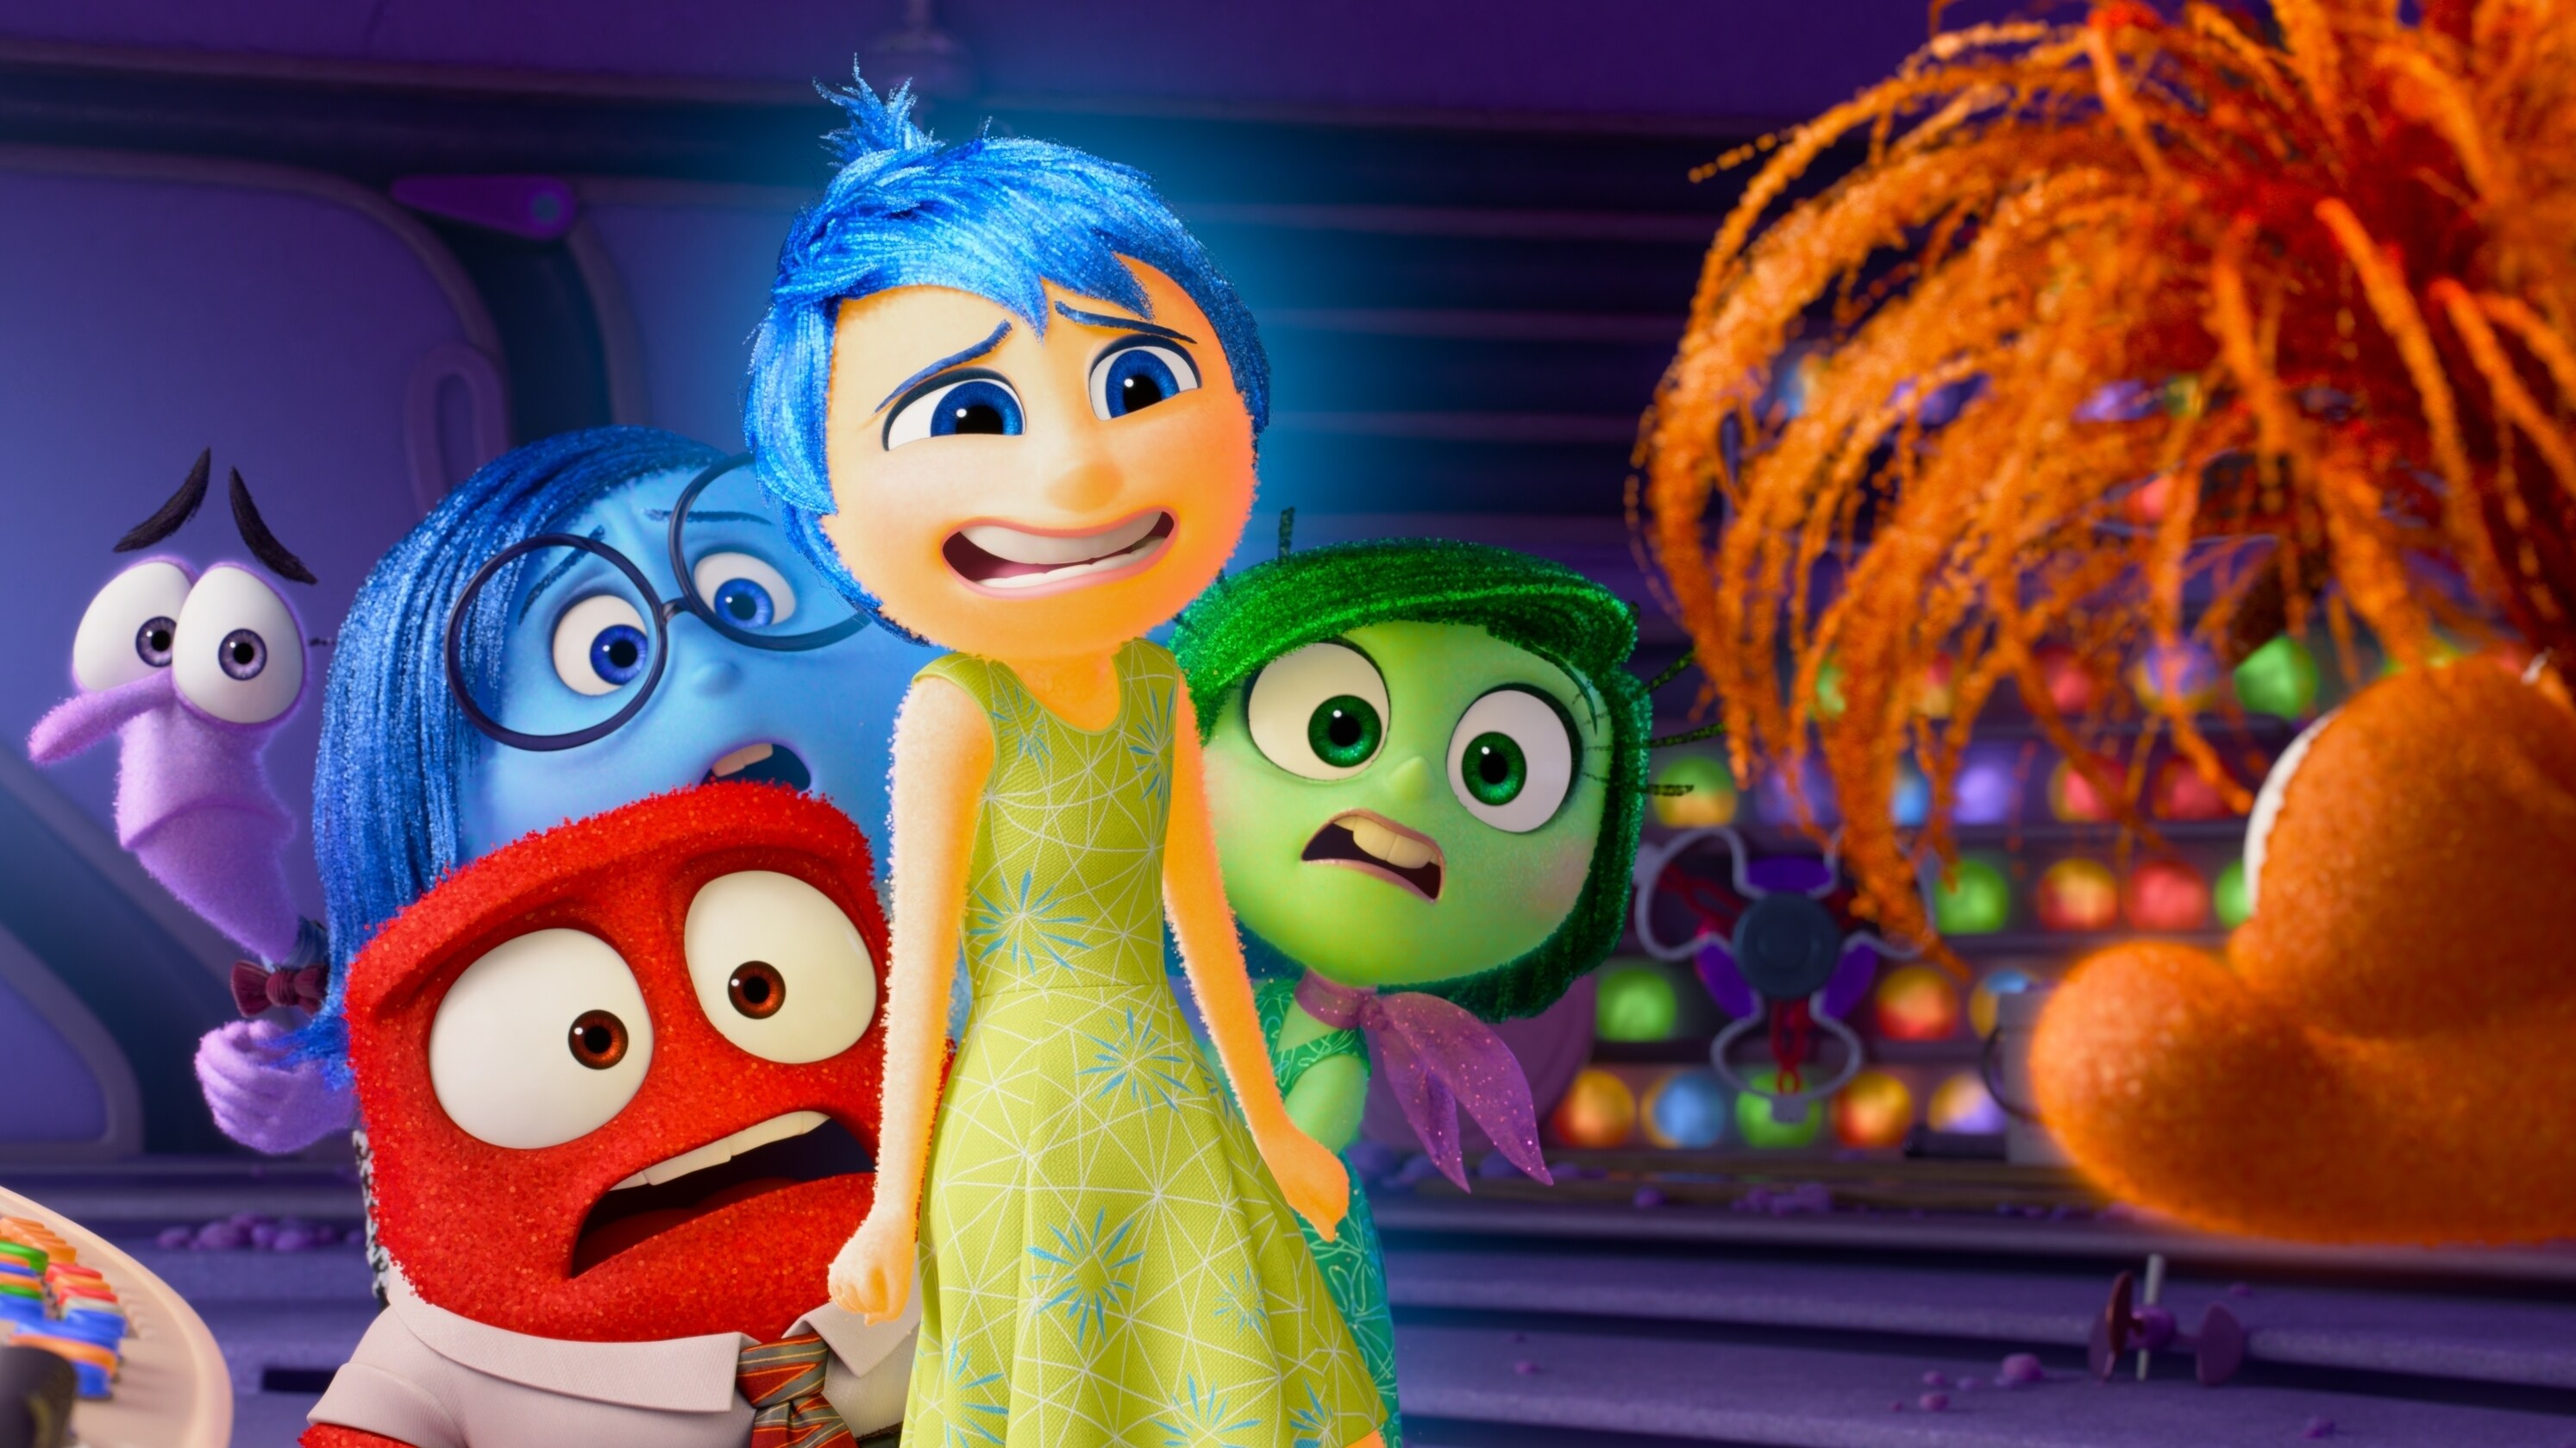 Joy, Disgust, Anger, Sadness and Fear meet Anxiety in Disney and Pixar's Inside Out 2.